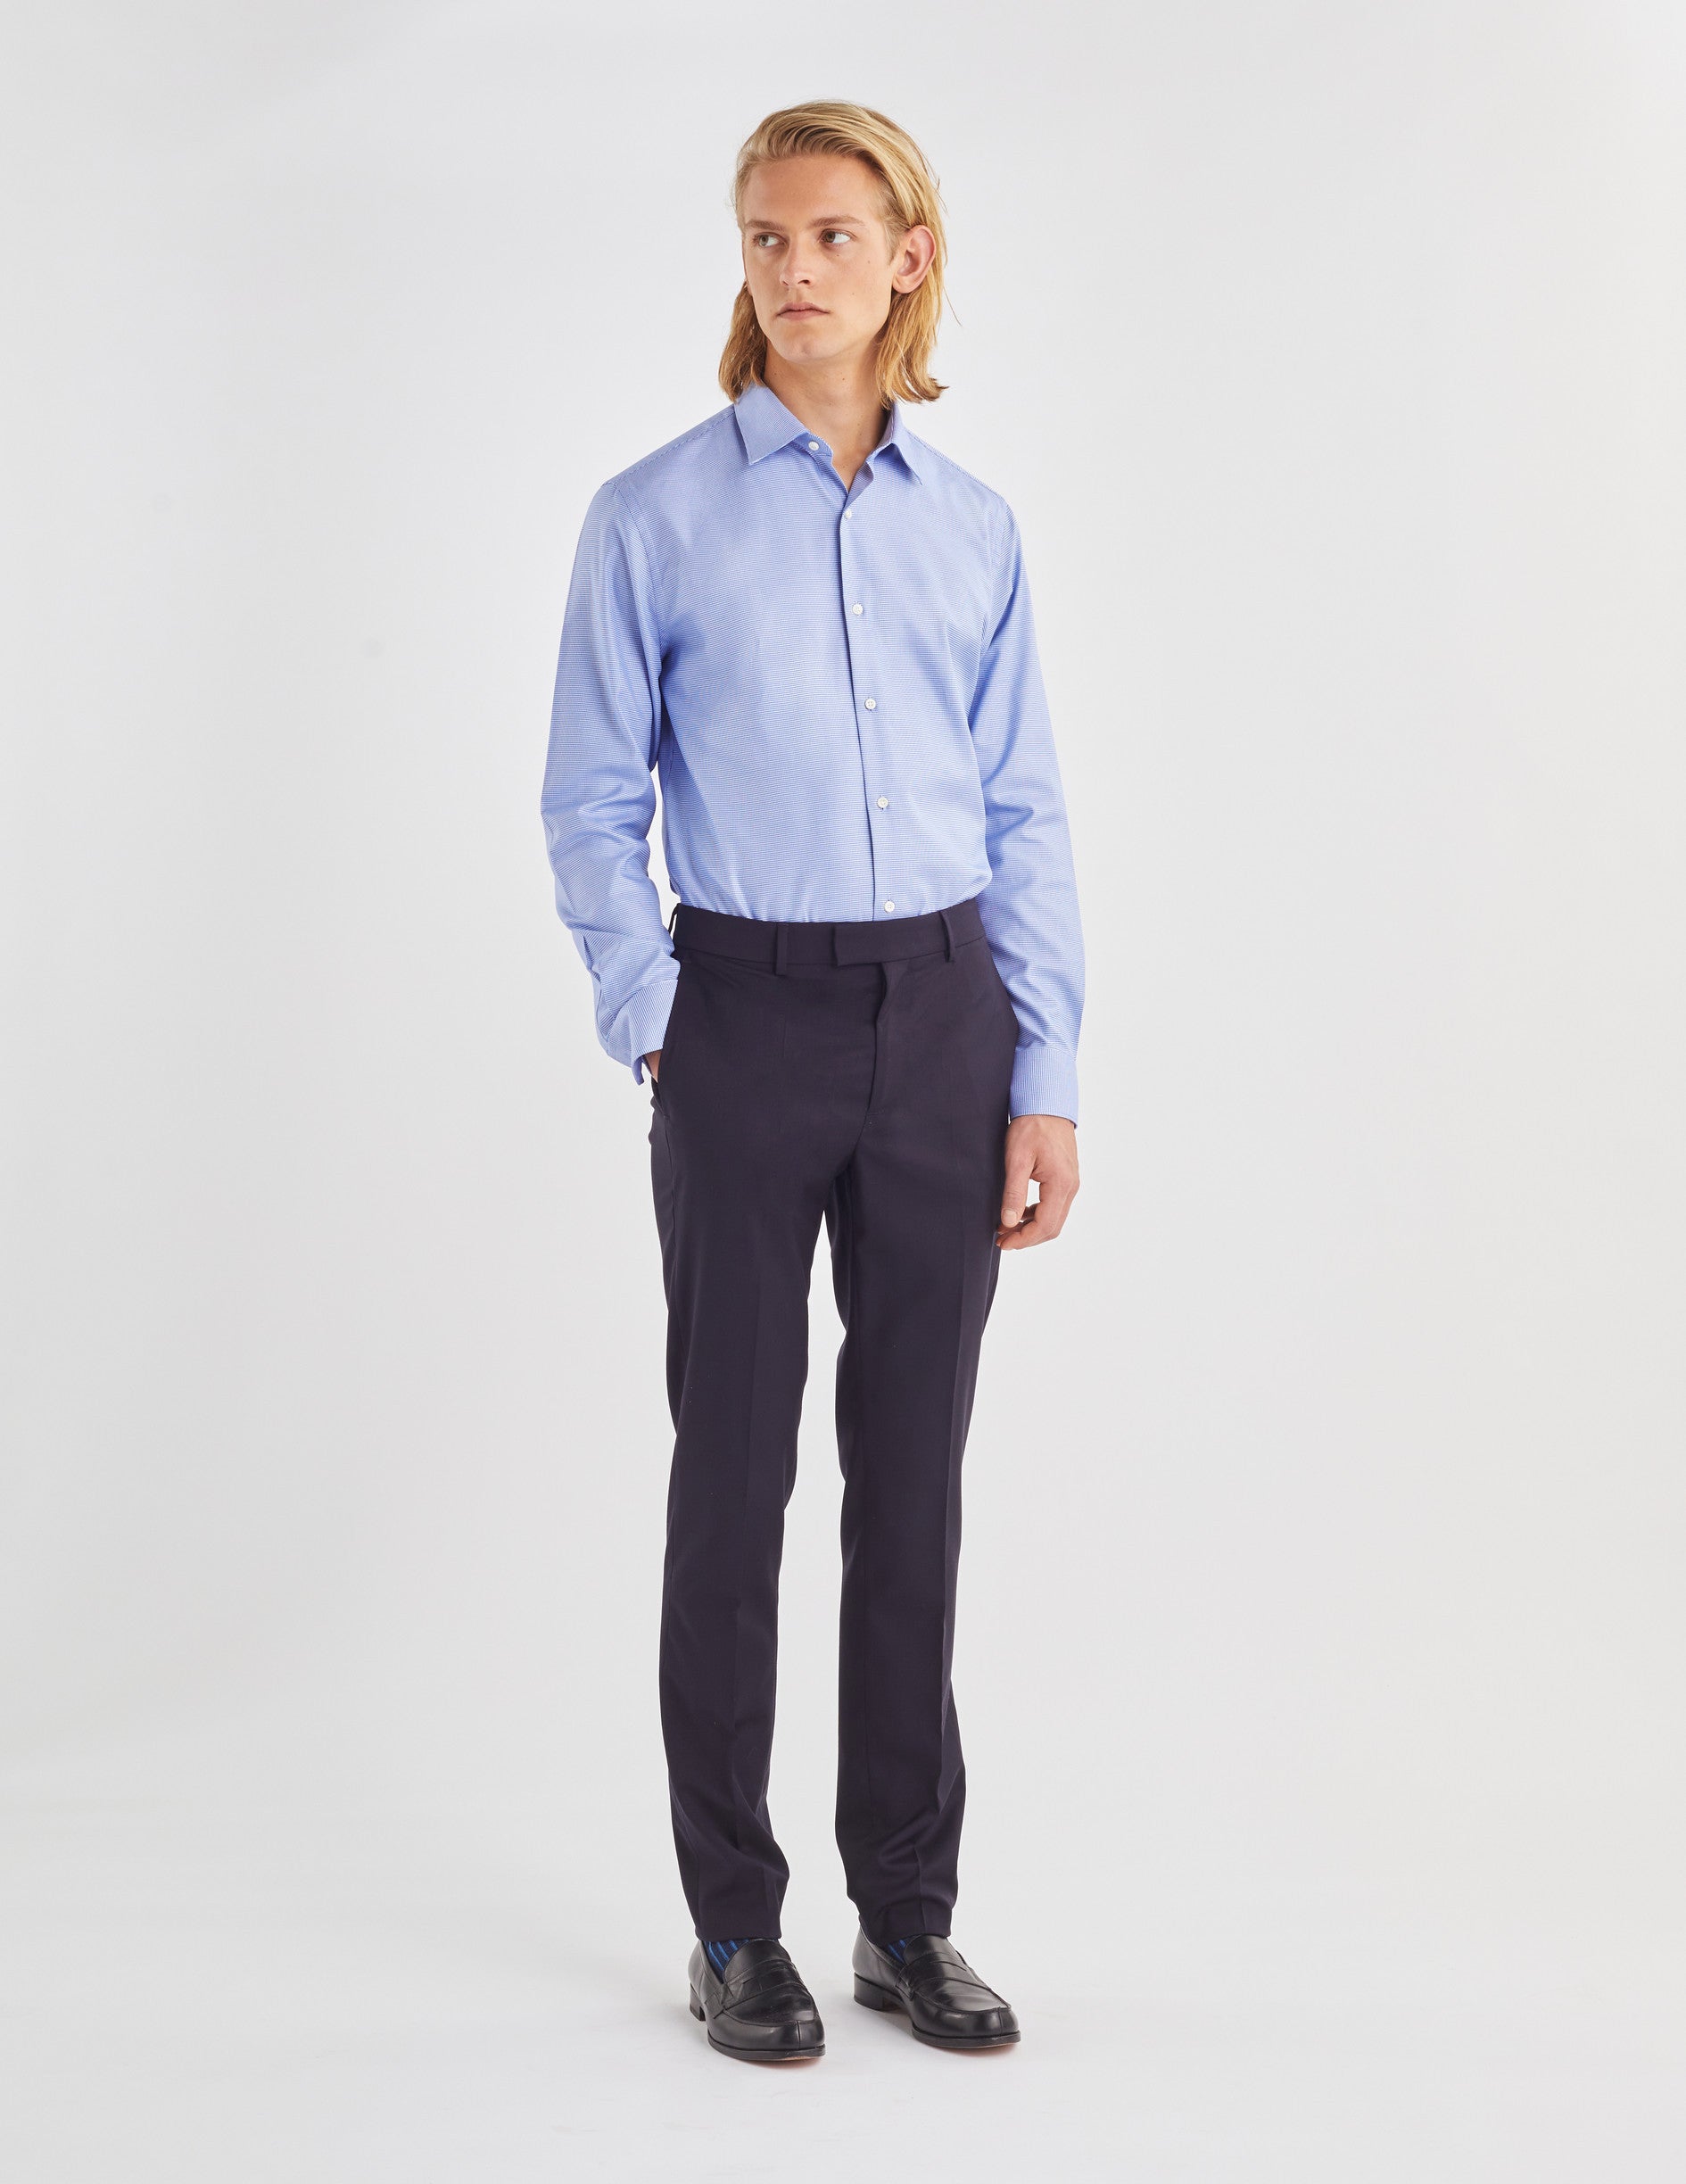 Semi-fitted navy shirt - Shaped - Figaret Collar